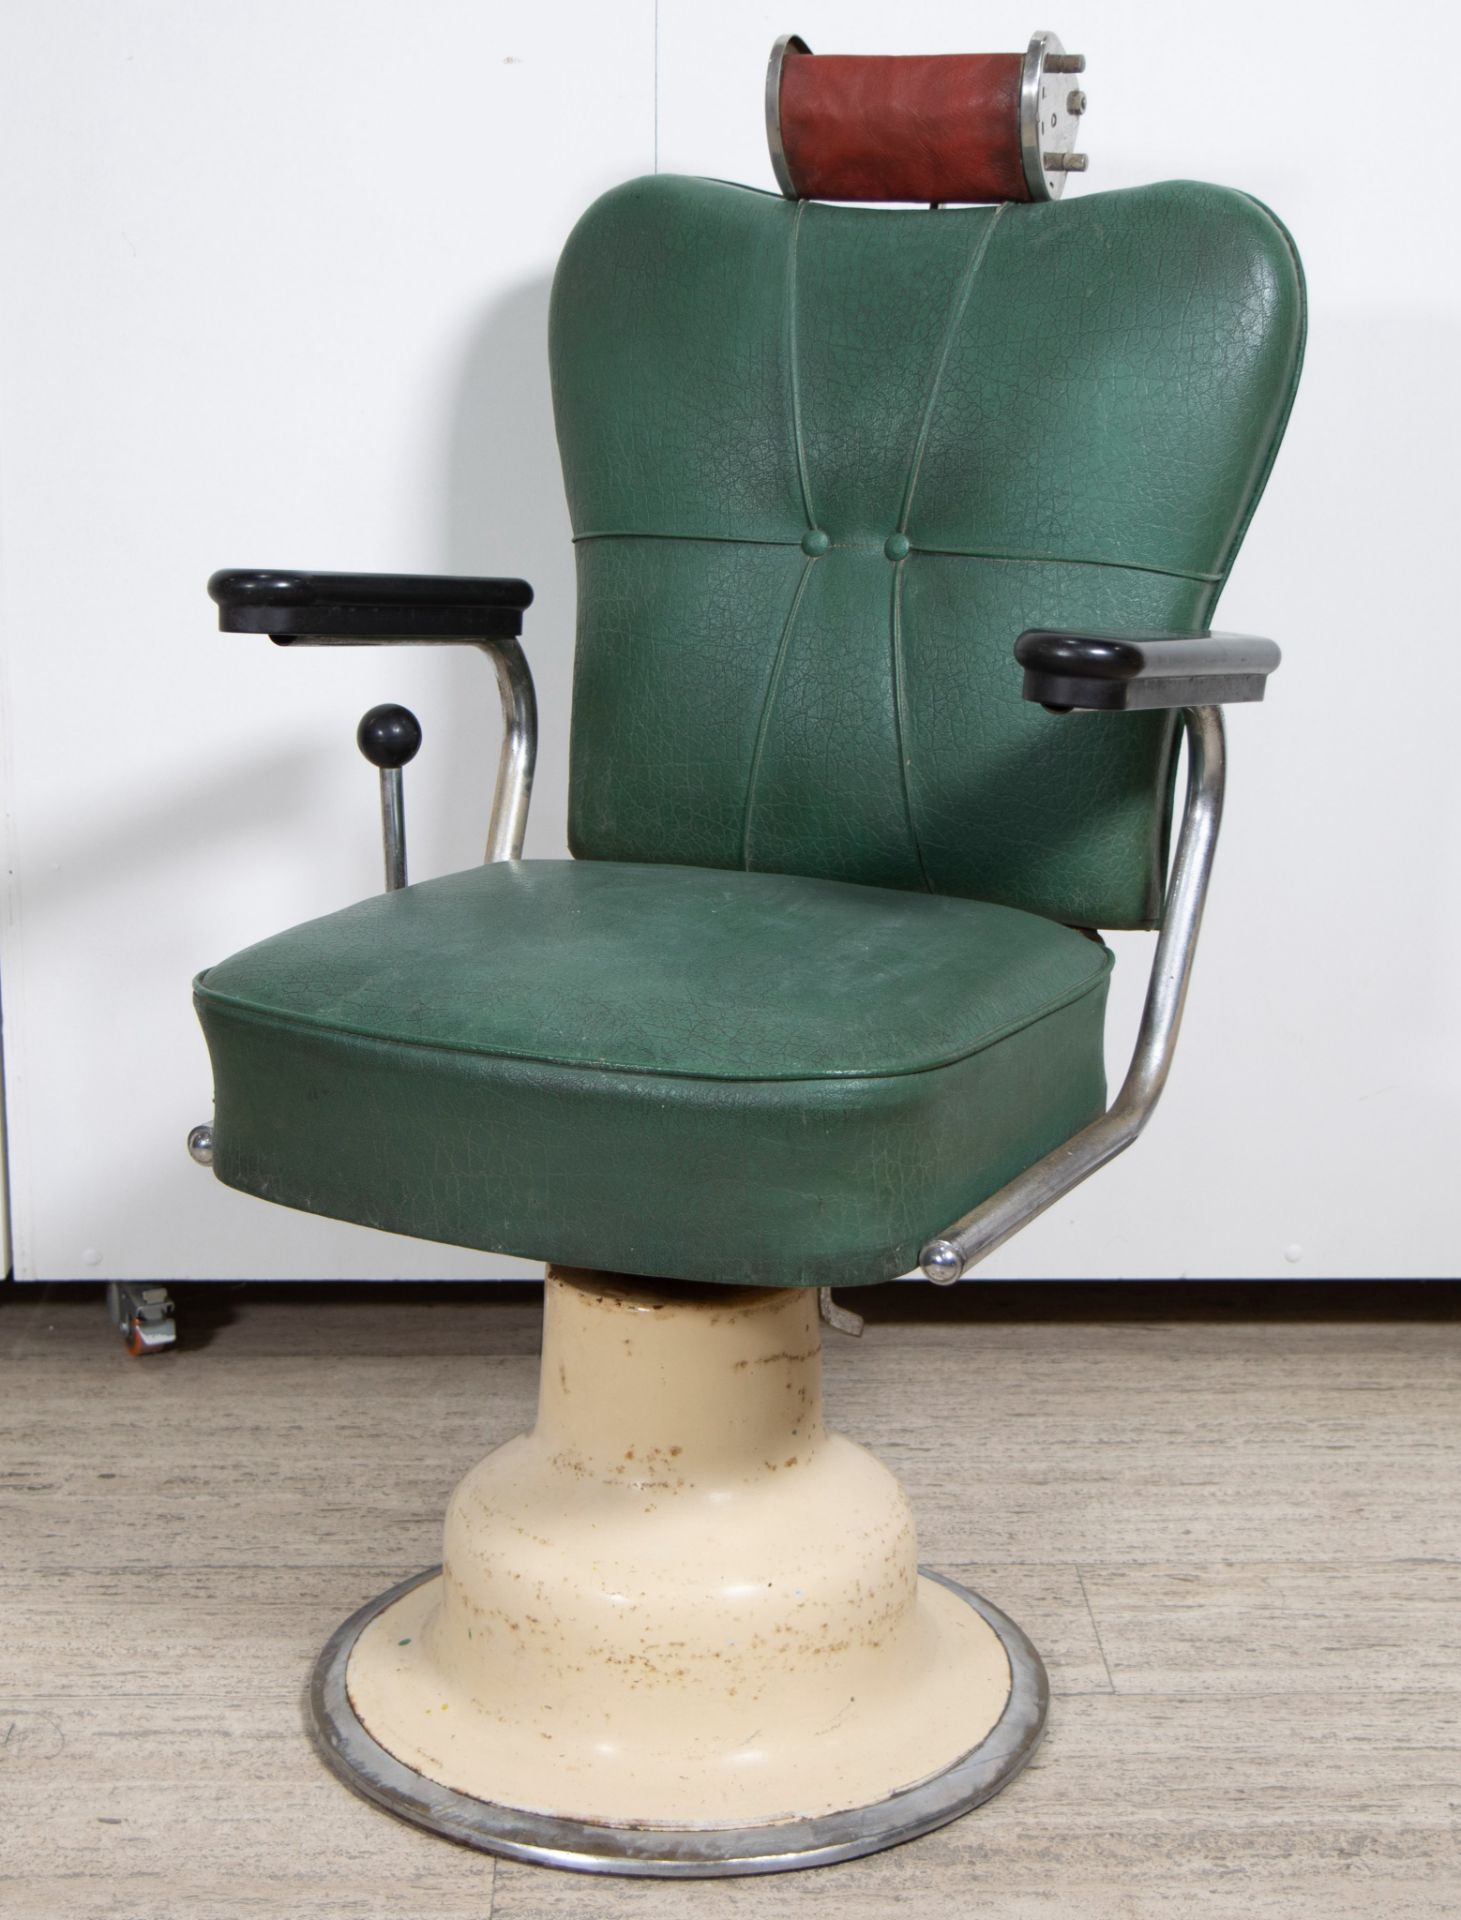 Vintage barber chair from the 1970s